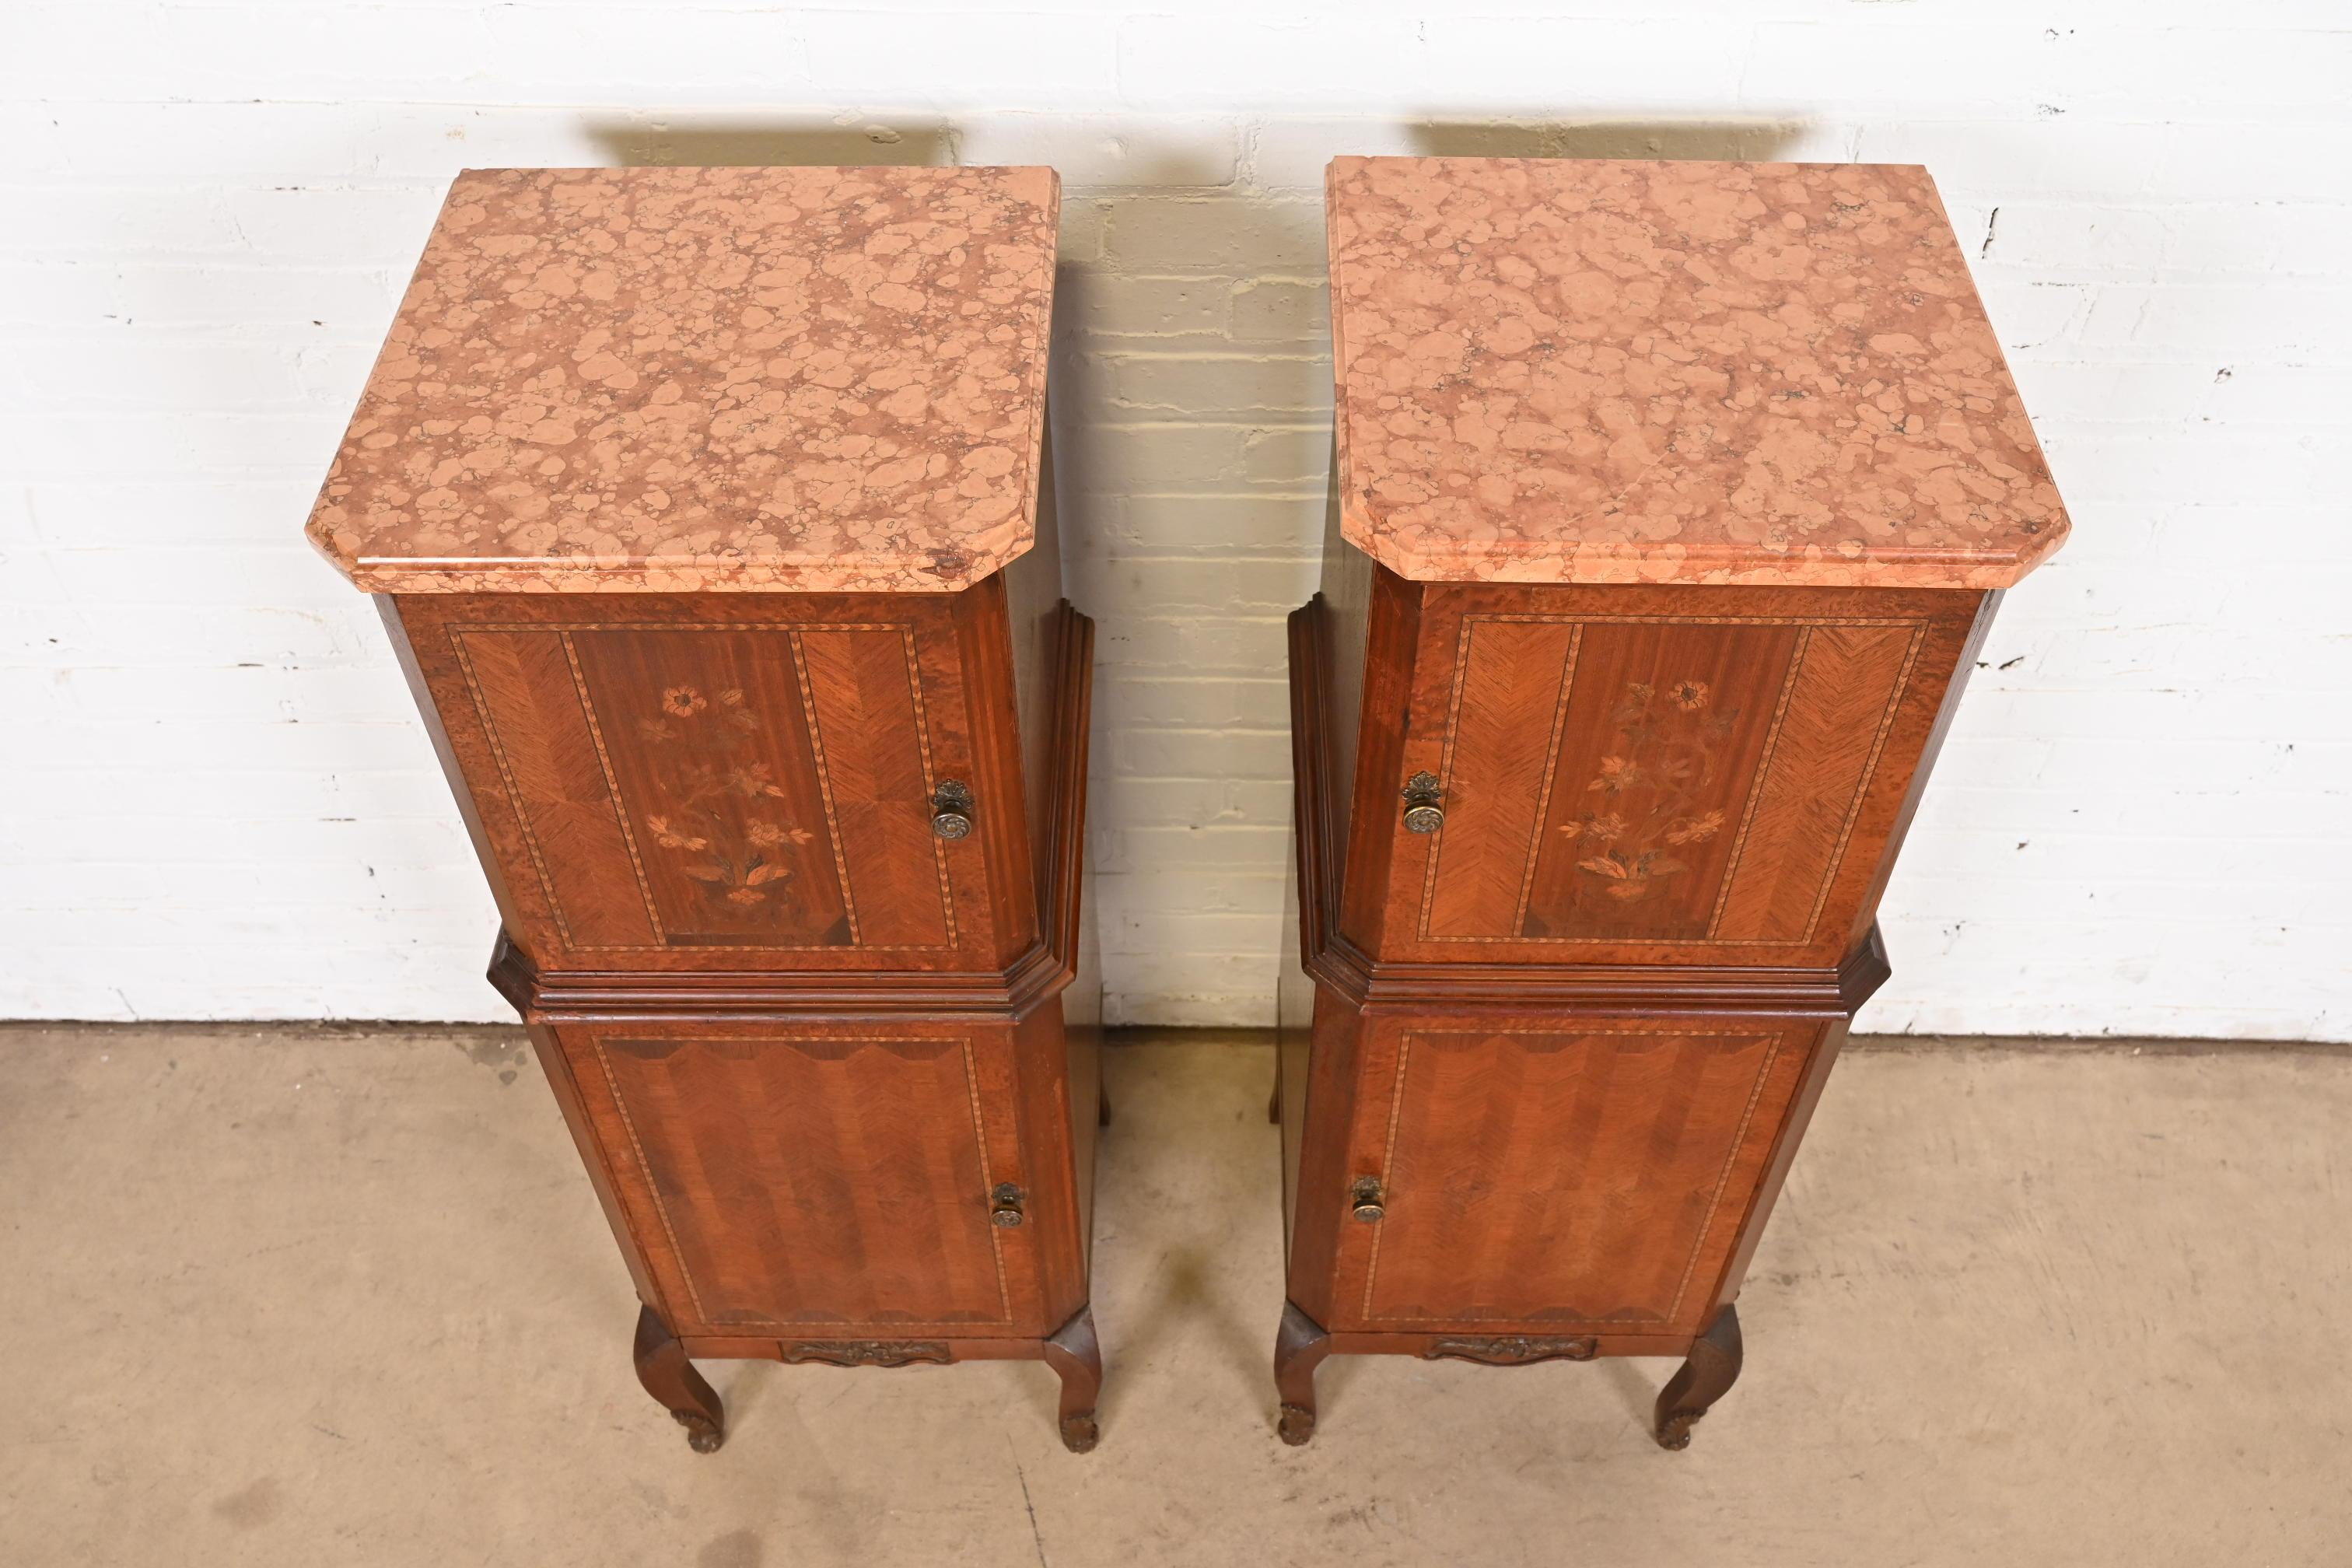 French Louis XV Kingwood Inlaid Marquetry Marble Top Lingerie Chests, Pair For Sale 10